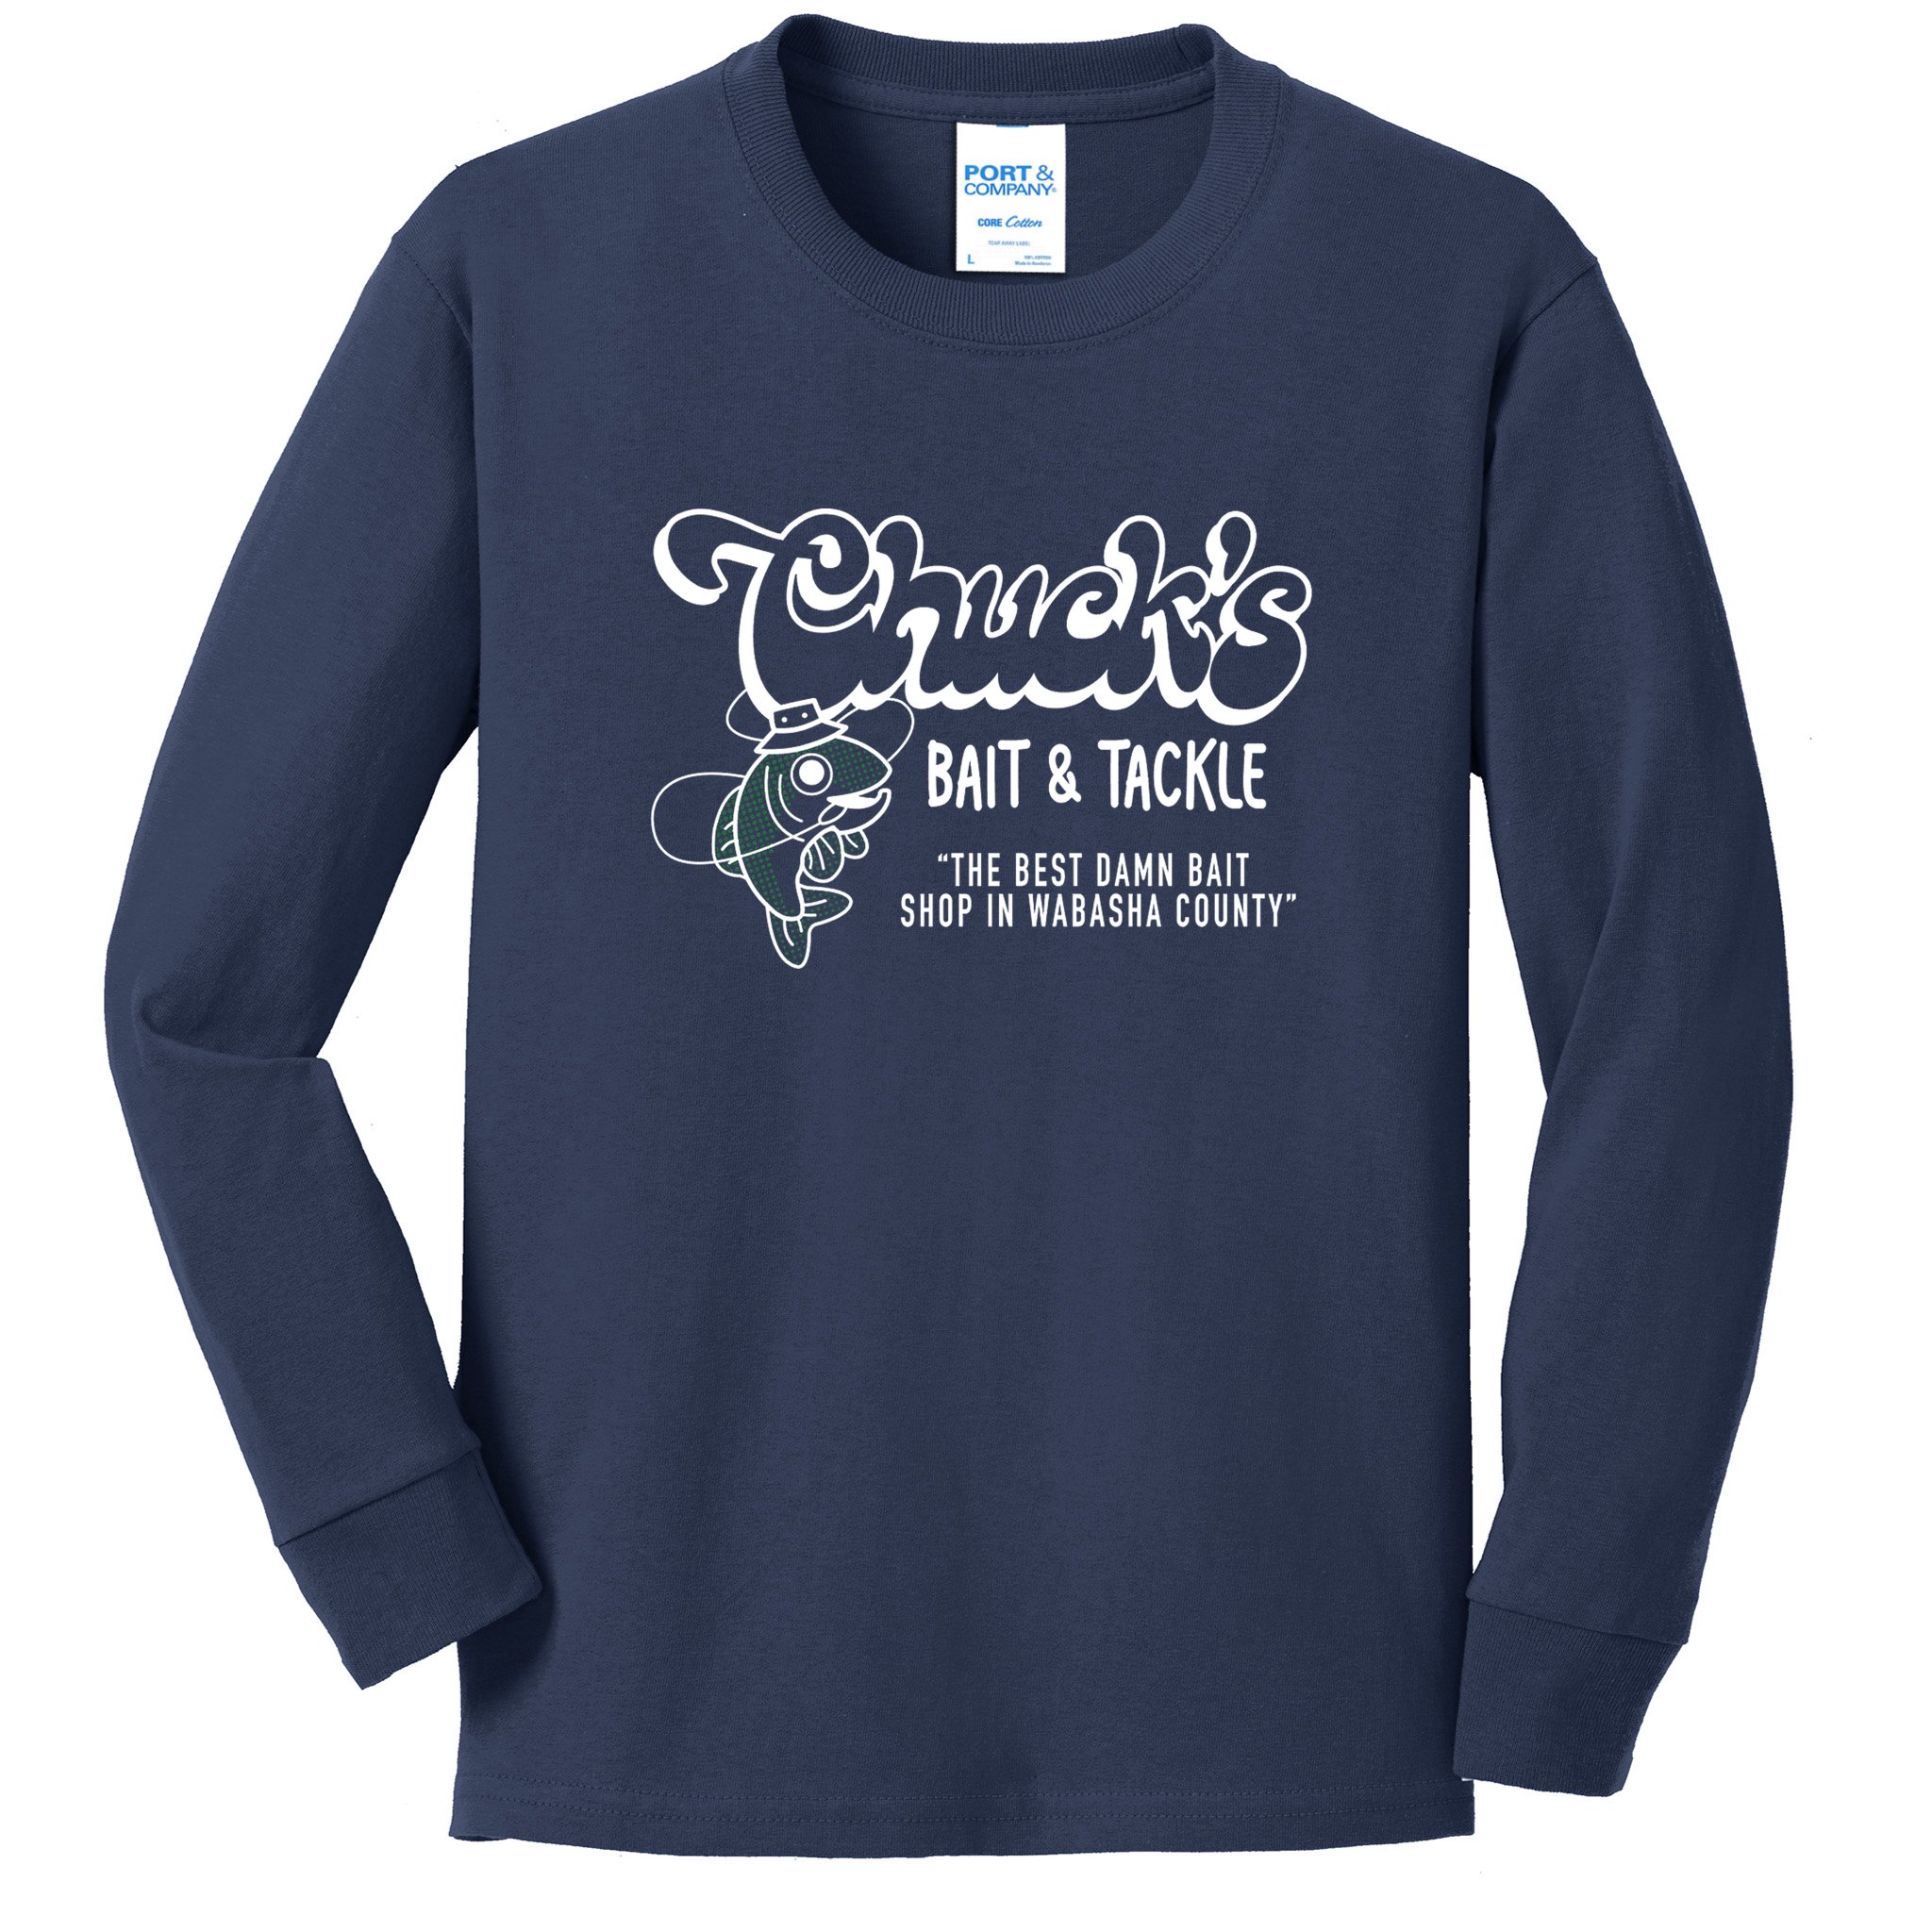 https://images3.teeshirtpalace.com/images/productImages/cbt8389509-chucks-bait--tackle-the-best-damn-bait-shop-in-wabsha-country-fishing-fathers--navy-ylt-garment.jpg